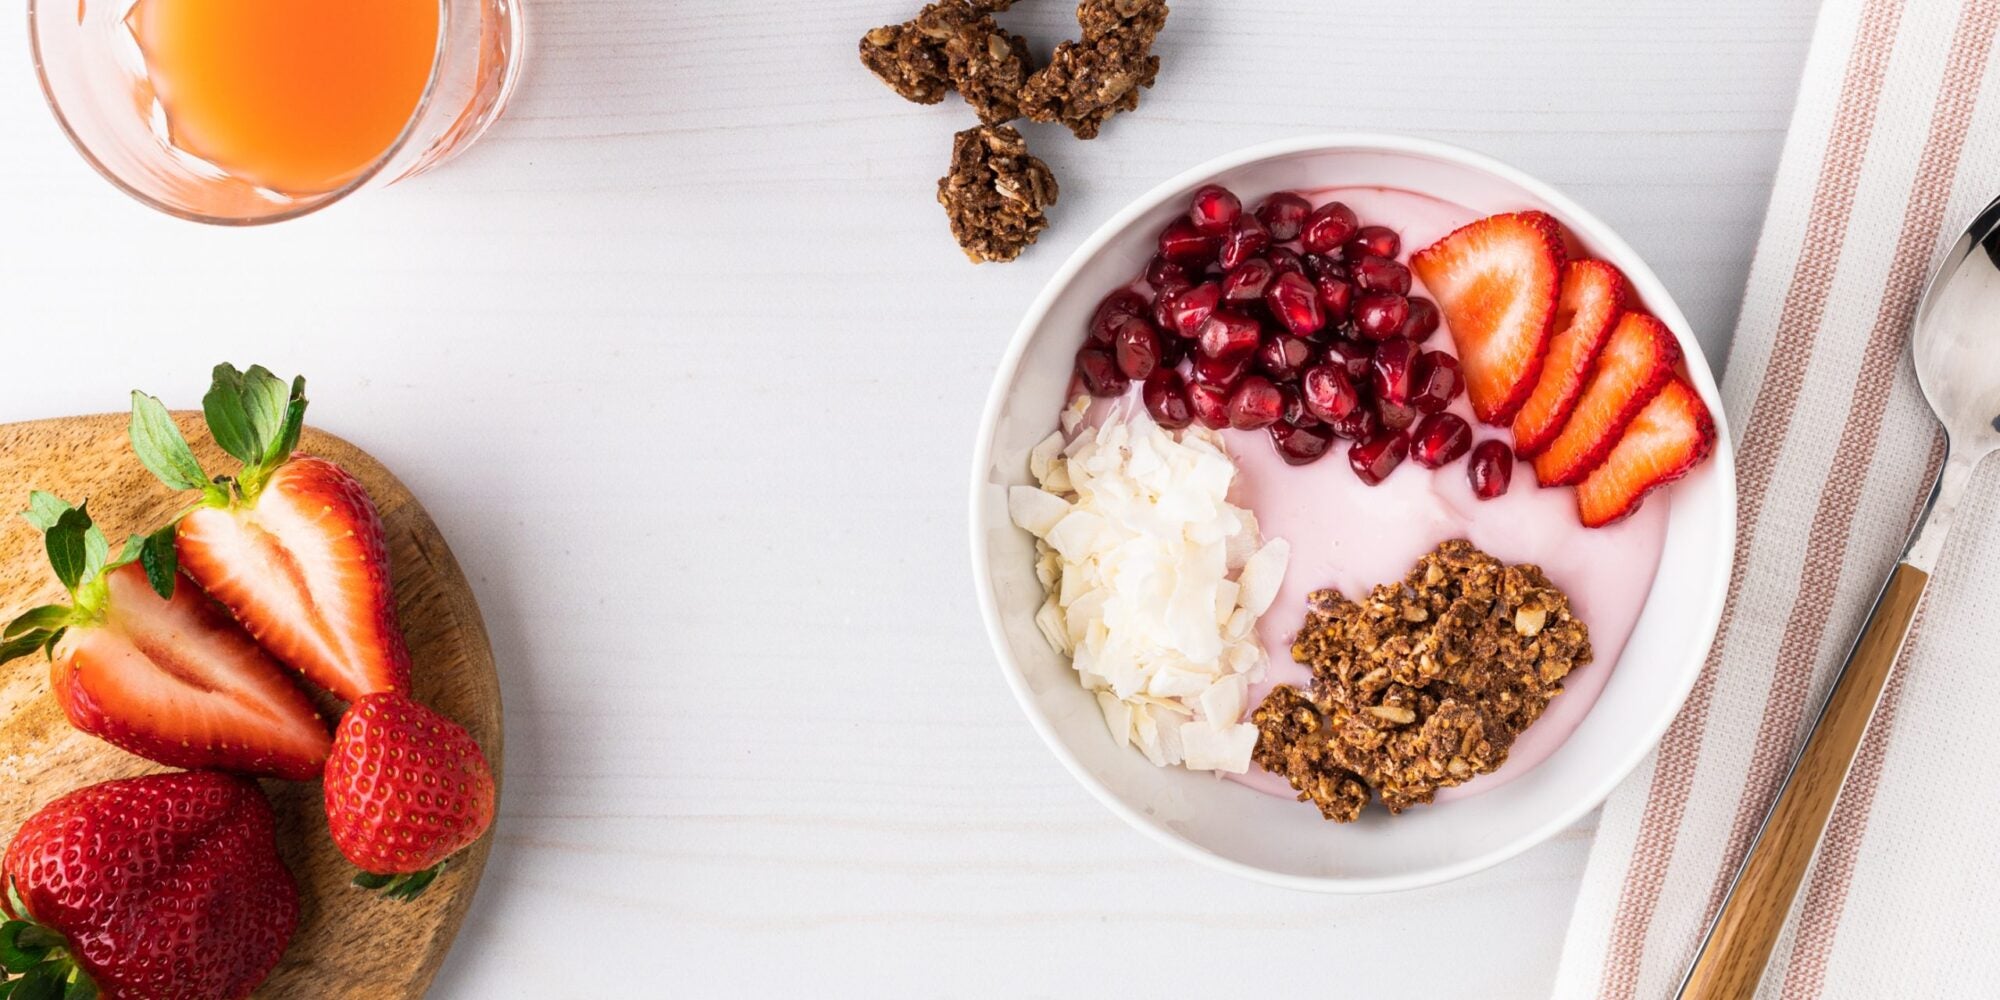 Heart-Healthy Smoothie Bowl